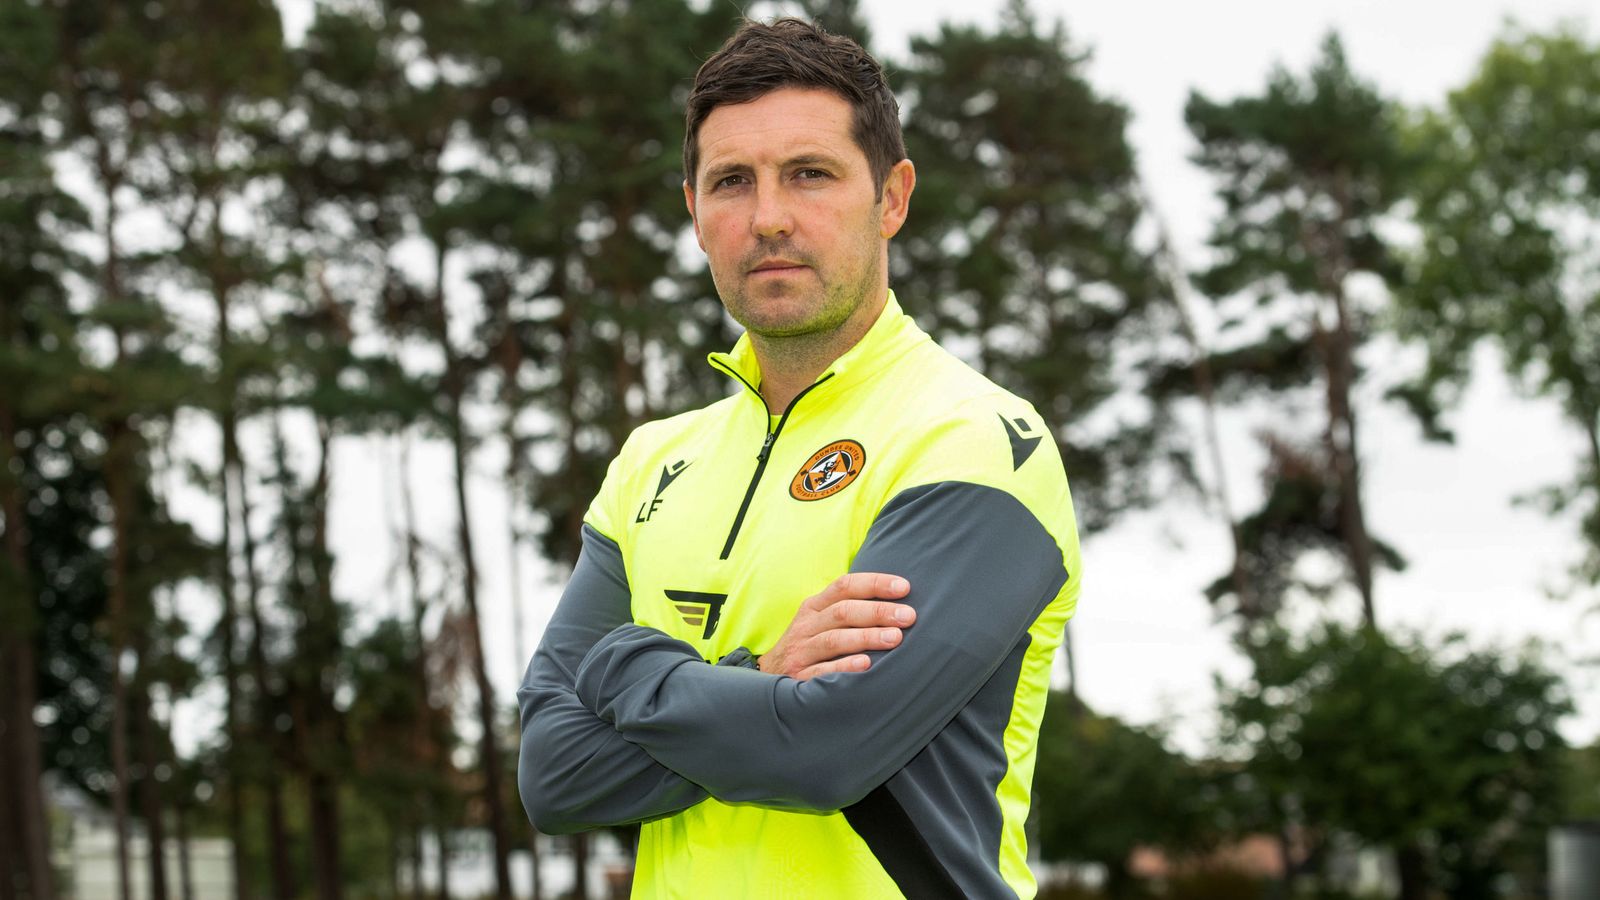 liam-fox-dundee-united-appoint-jack-ross-assistant-as-head-coach-with-east-fife-manager-stevie-crawford-to-join